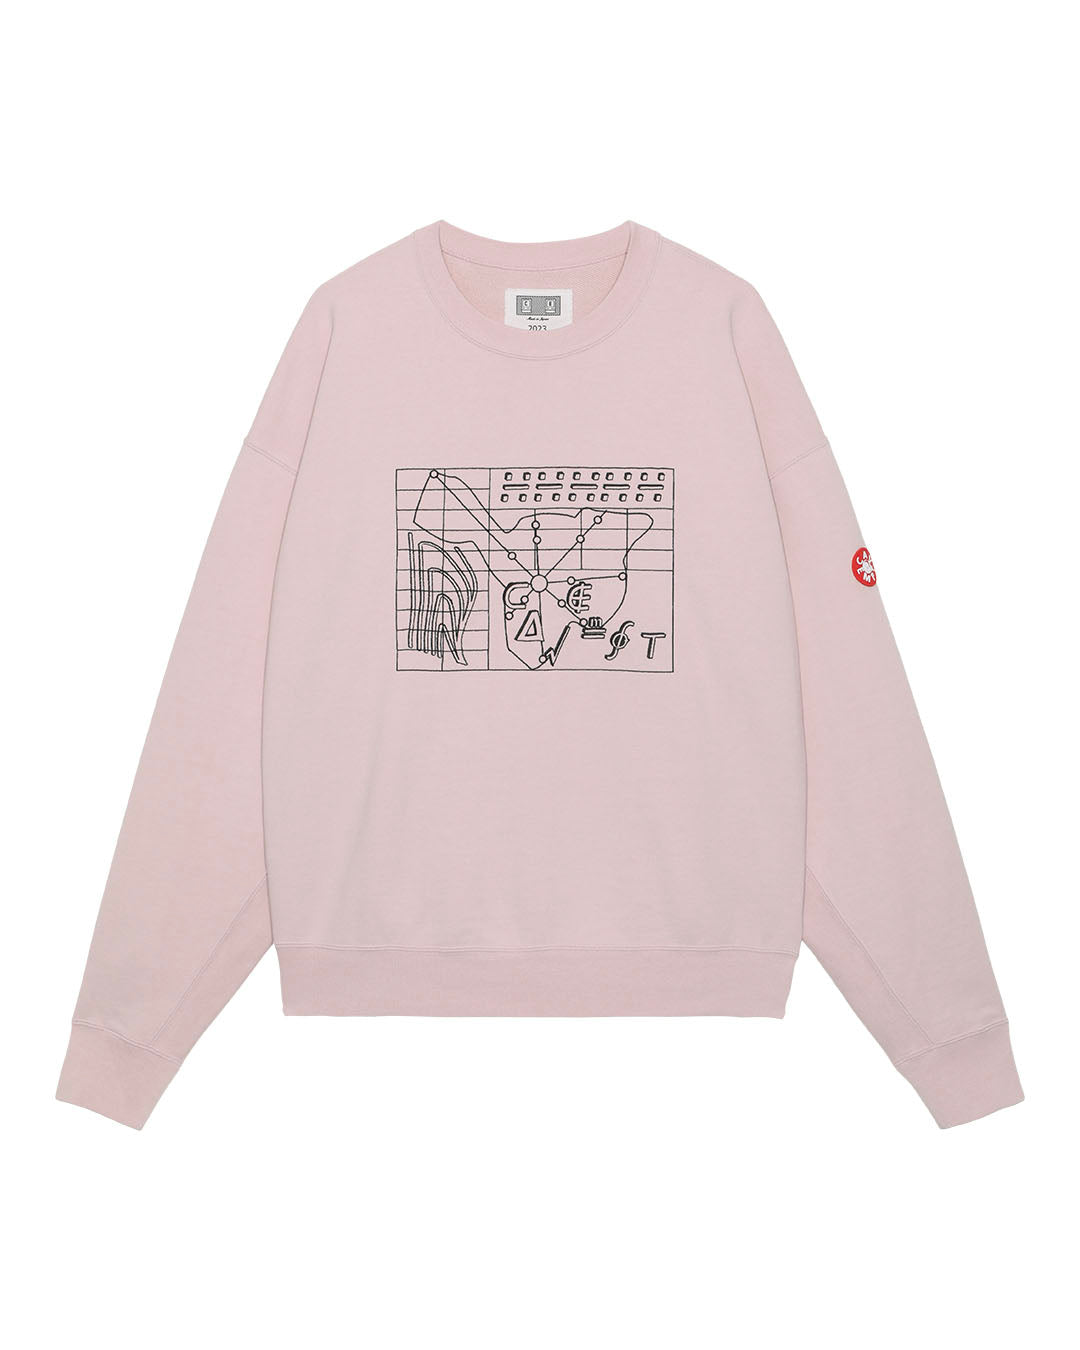 [CE] NOT ELEMENT OF CREW NECK - PINK